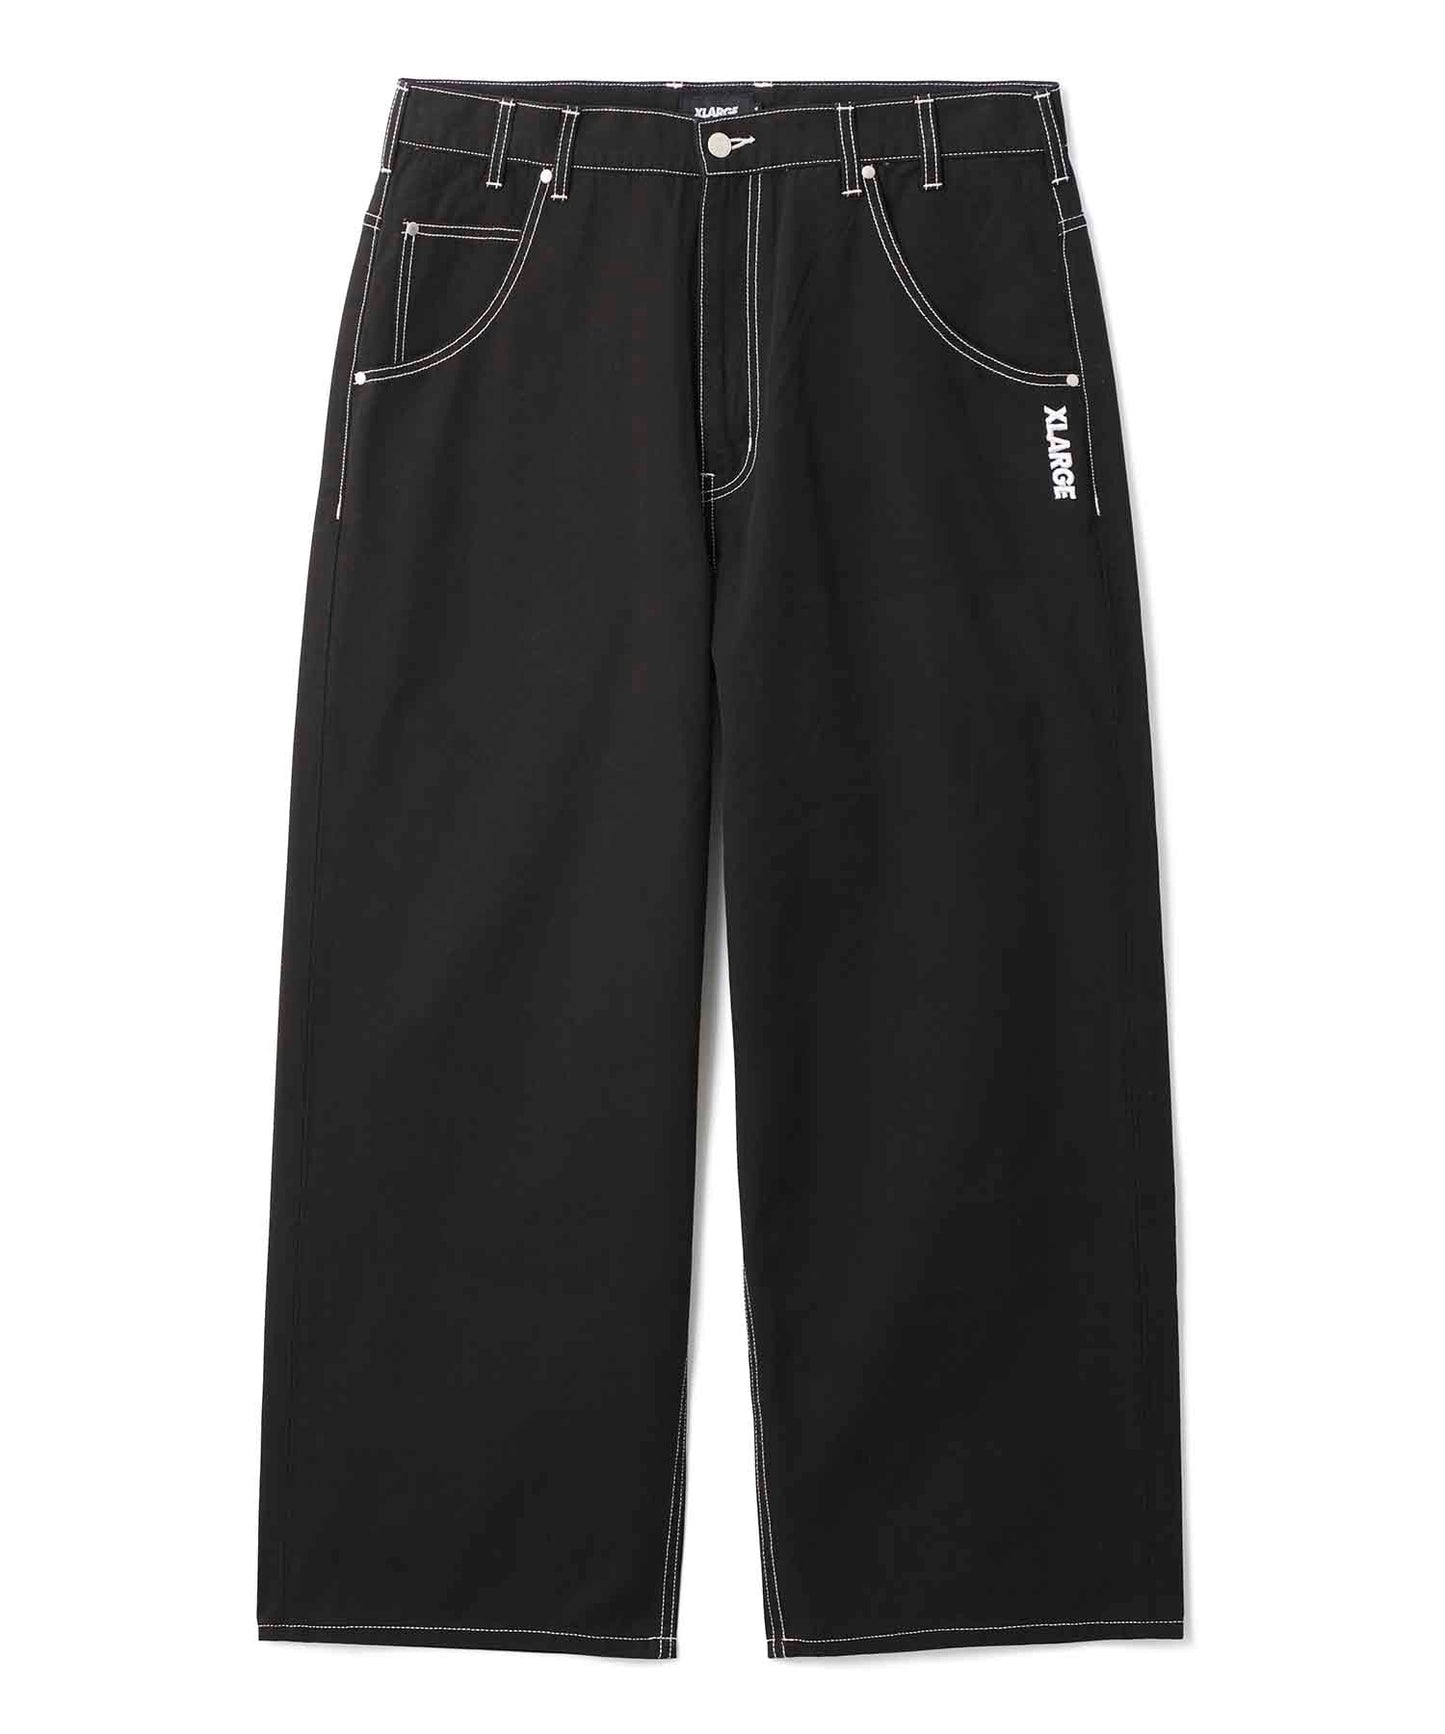 CONTRAST STITCH LEATHER PATCHED PANTS